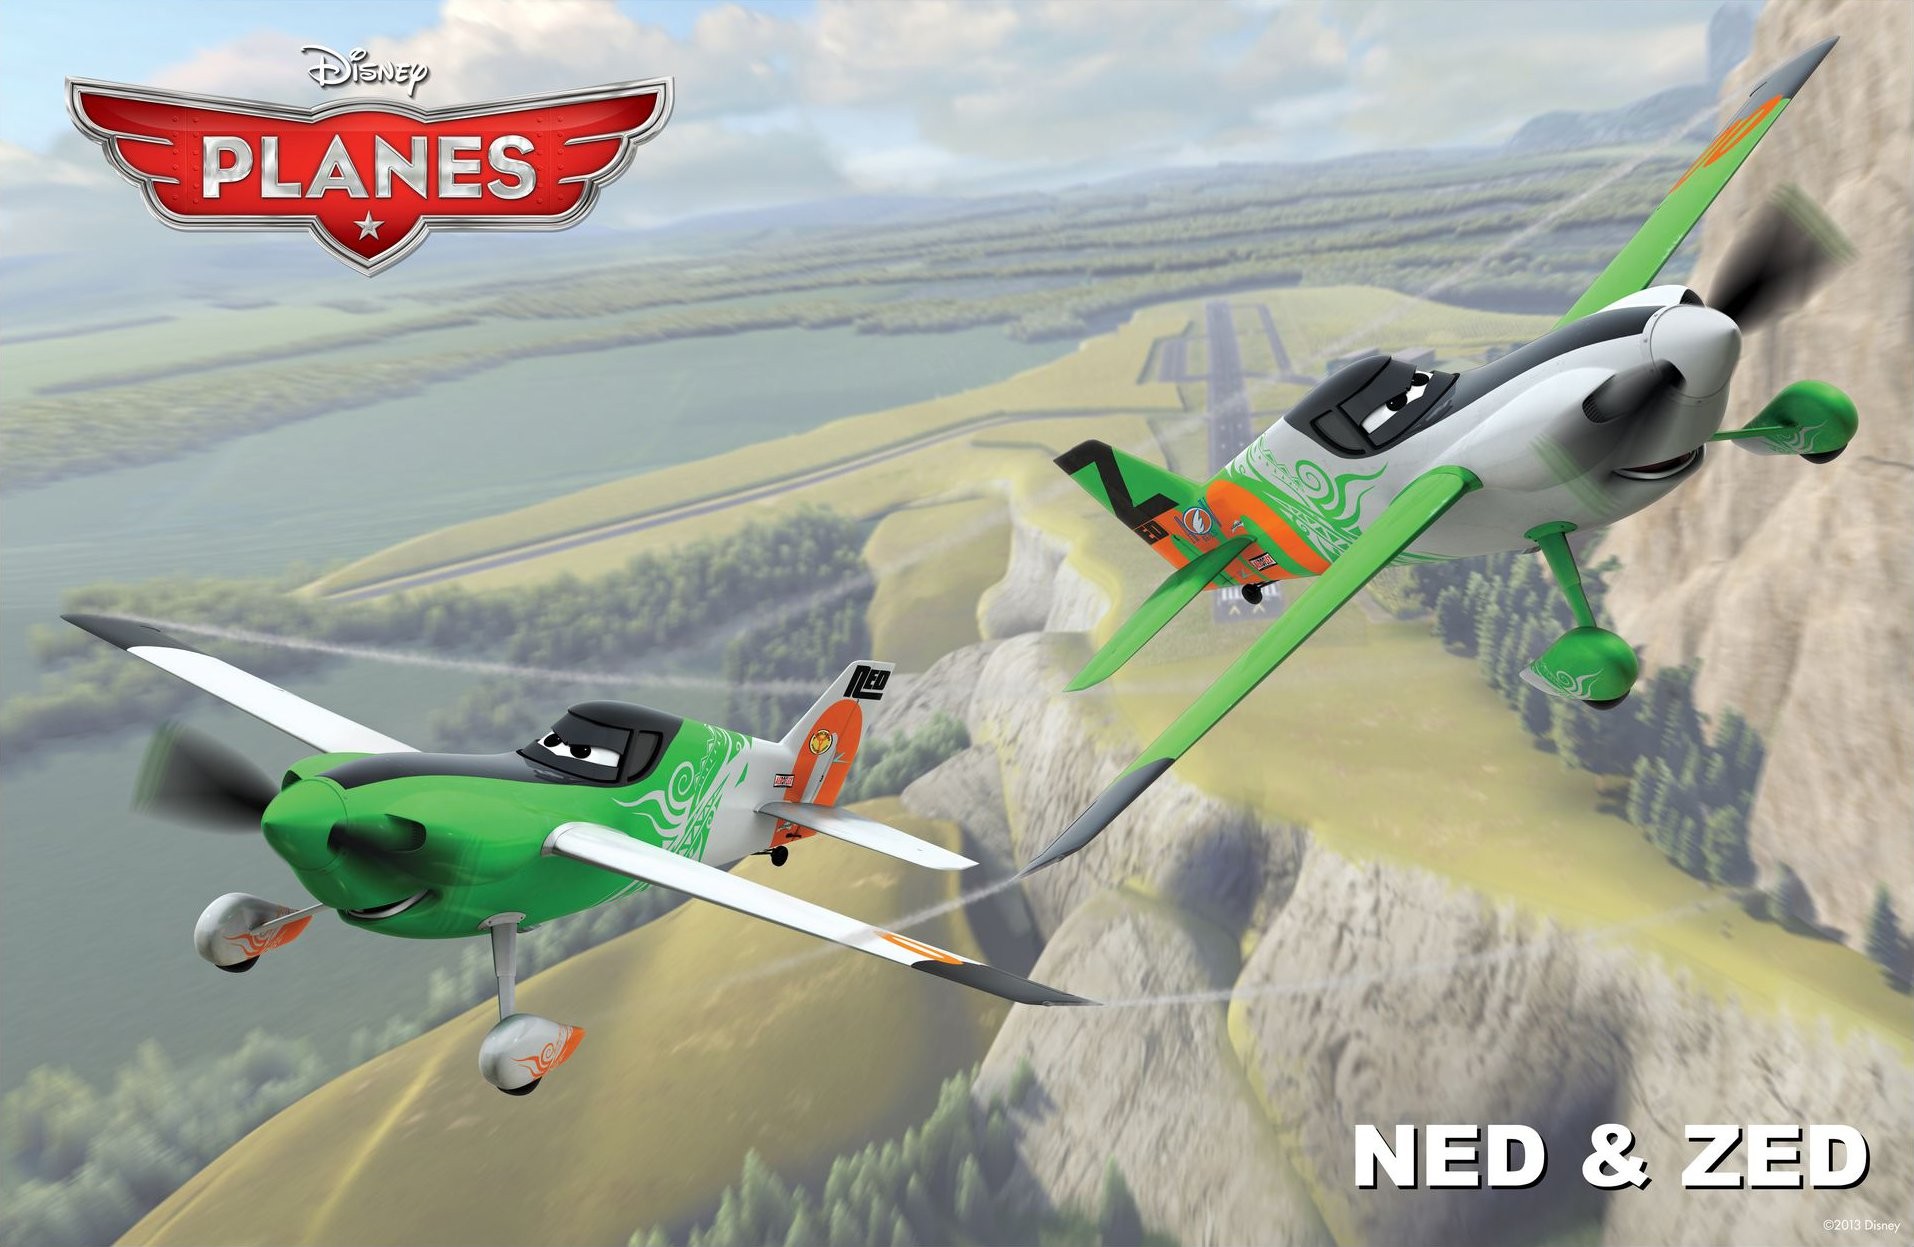 Ned and Zed from Walt Disney Pictures' Planes (2013)